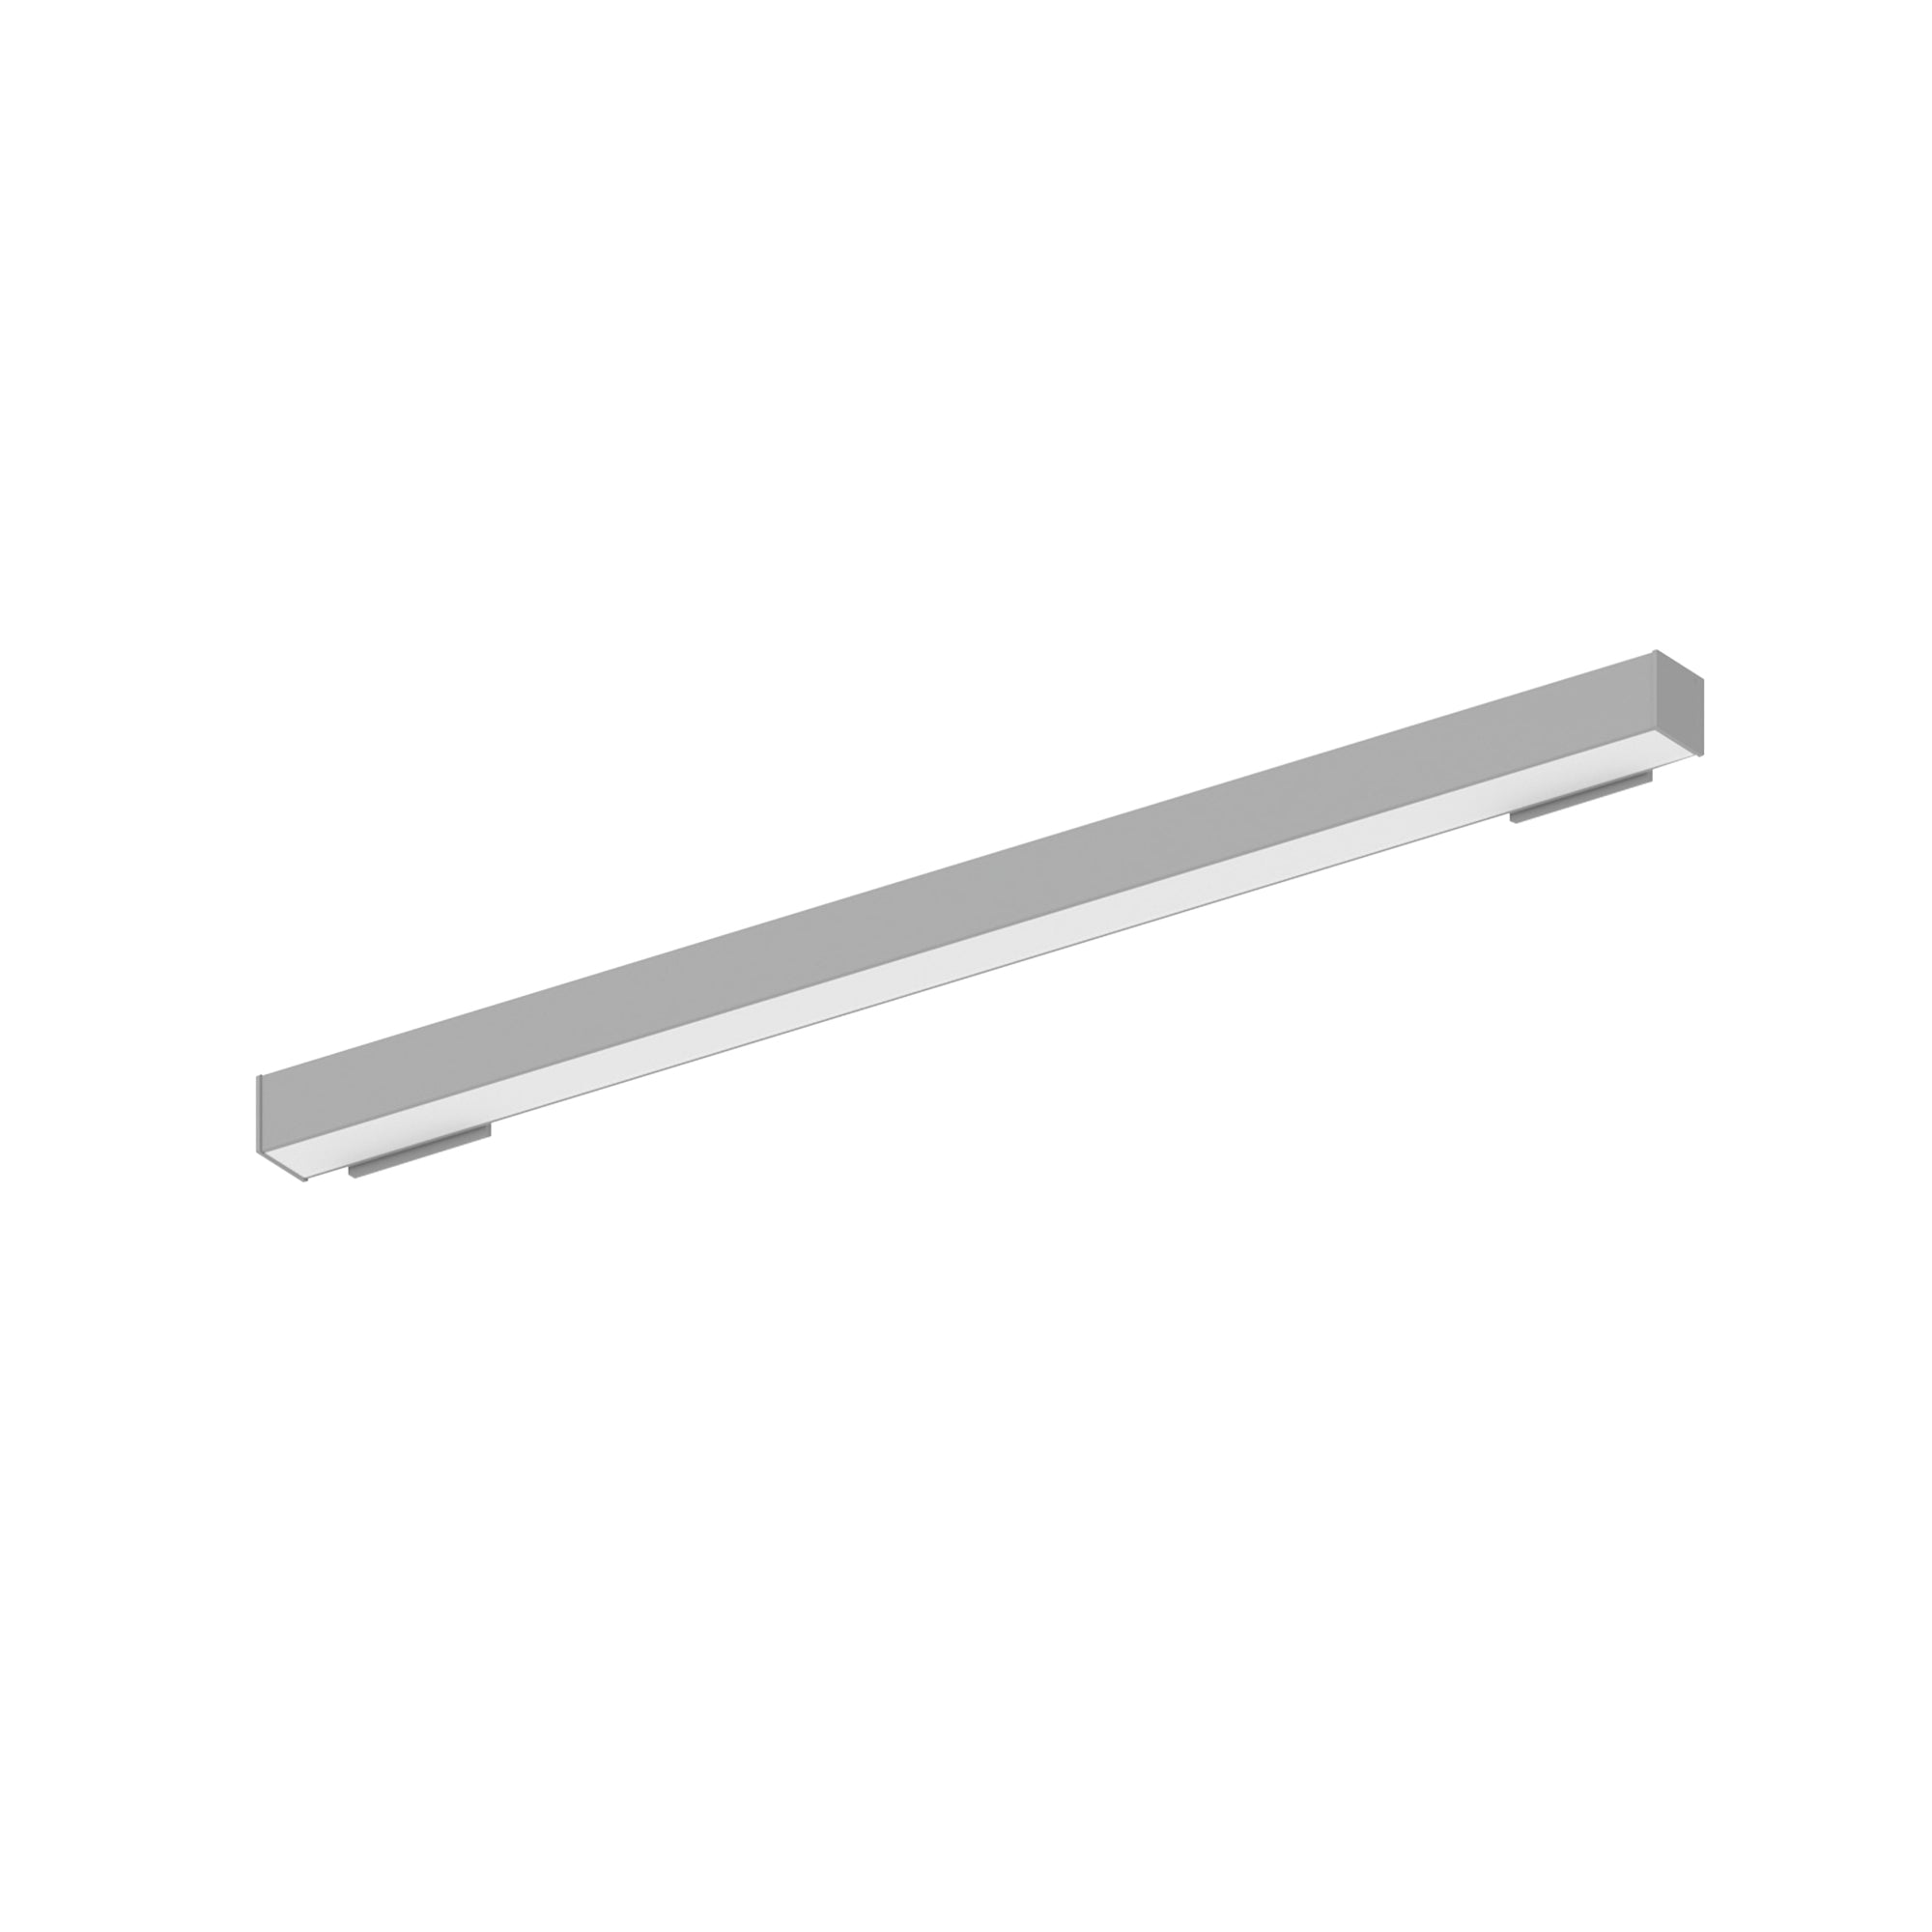 Nora Lighting NWLIN-41035A/L2-R2P - Linear - 4' L-Line LED Wall Mount Linear, 4200lm / 3500K, 2 Inchx4 Inch Left Plate & 2 Inchx4 Inch Right Plate, Right Power Feed, Aluminum Finish